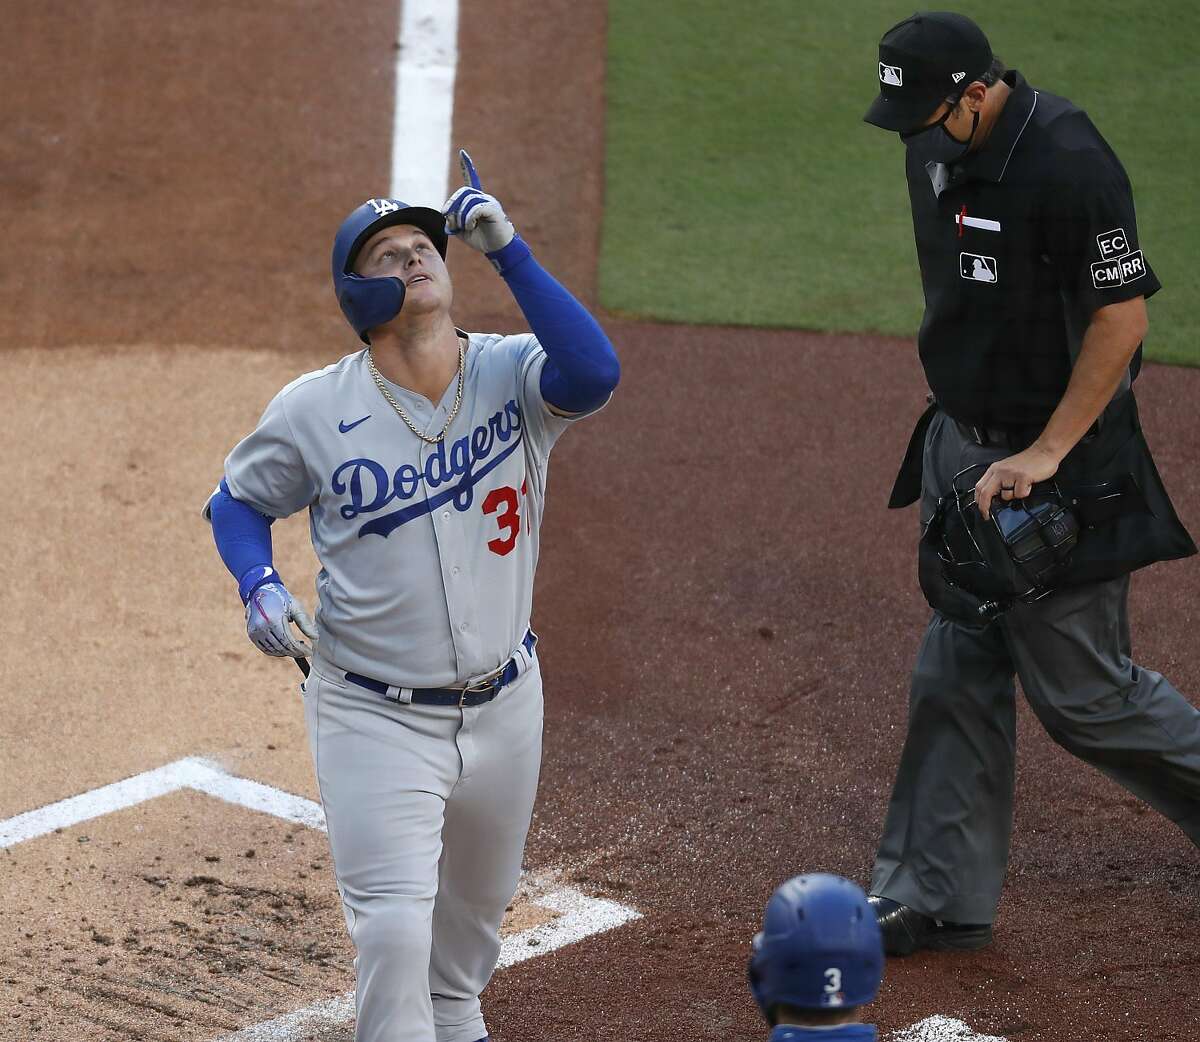 Dodgers postseason hero Joc Pederson will now be a Cub. celebrates a two-run home run in the 2nd inning against the San Diego Padres at Petco Park on August 5, 2020.